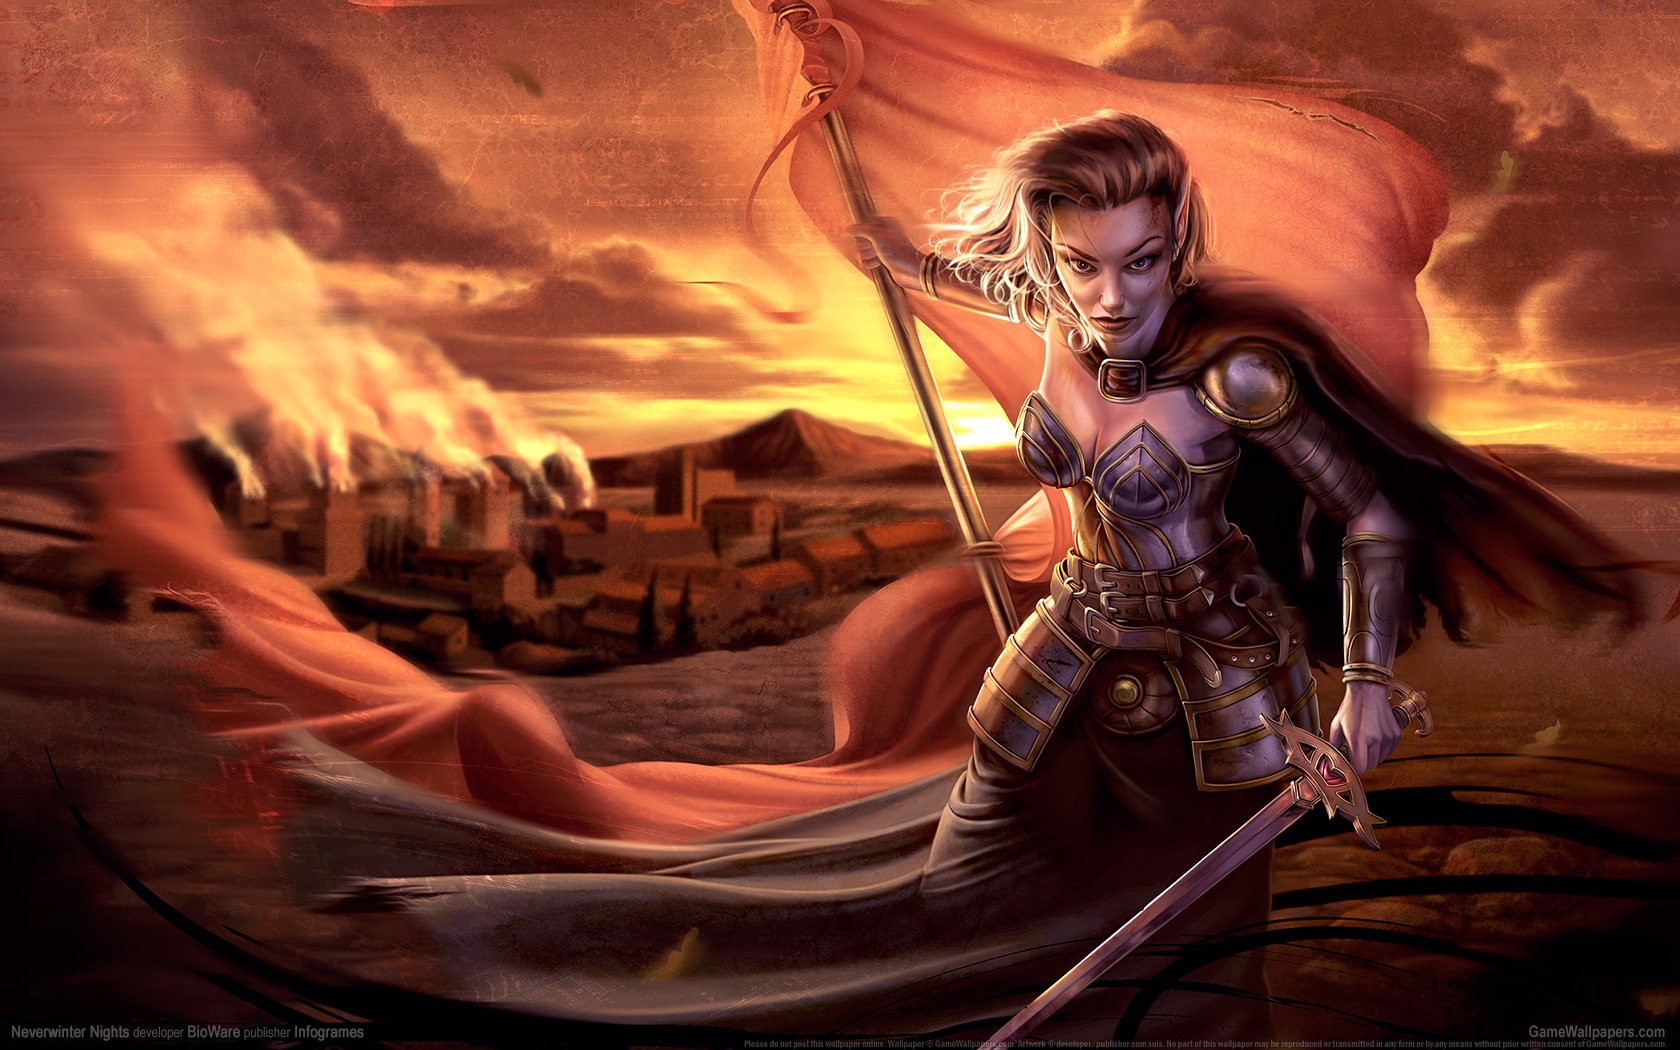 Neverwinter Nights 1680x1050 wallpaper or background 11